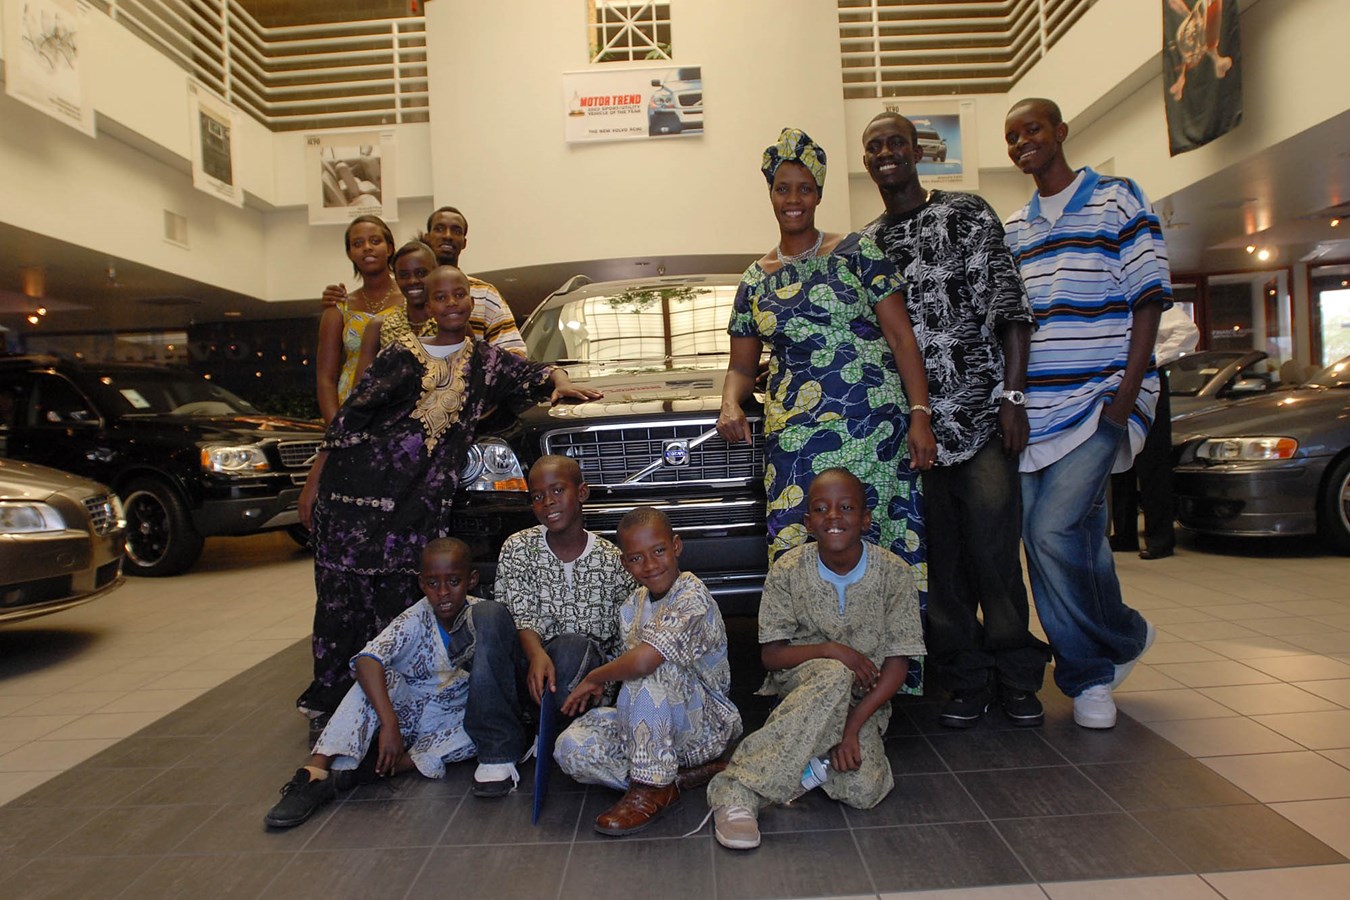 Fifth Annual Volvo for life Awards grand winner, Rose Mapendo, with her 10 children receiving a new Volvo